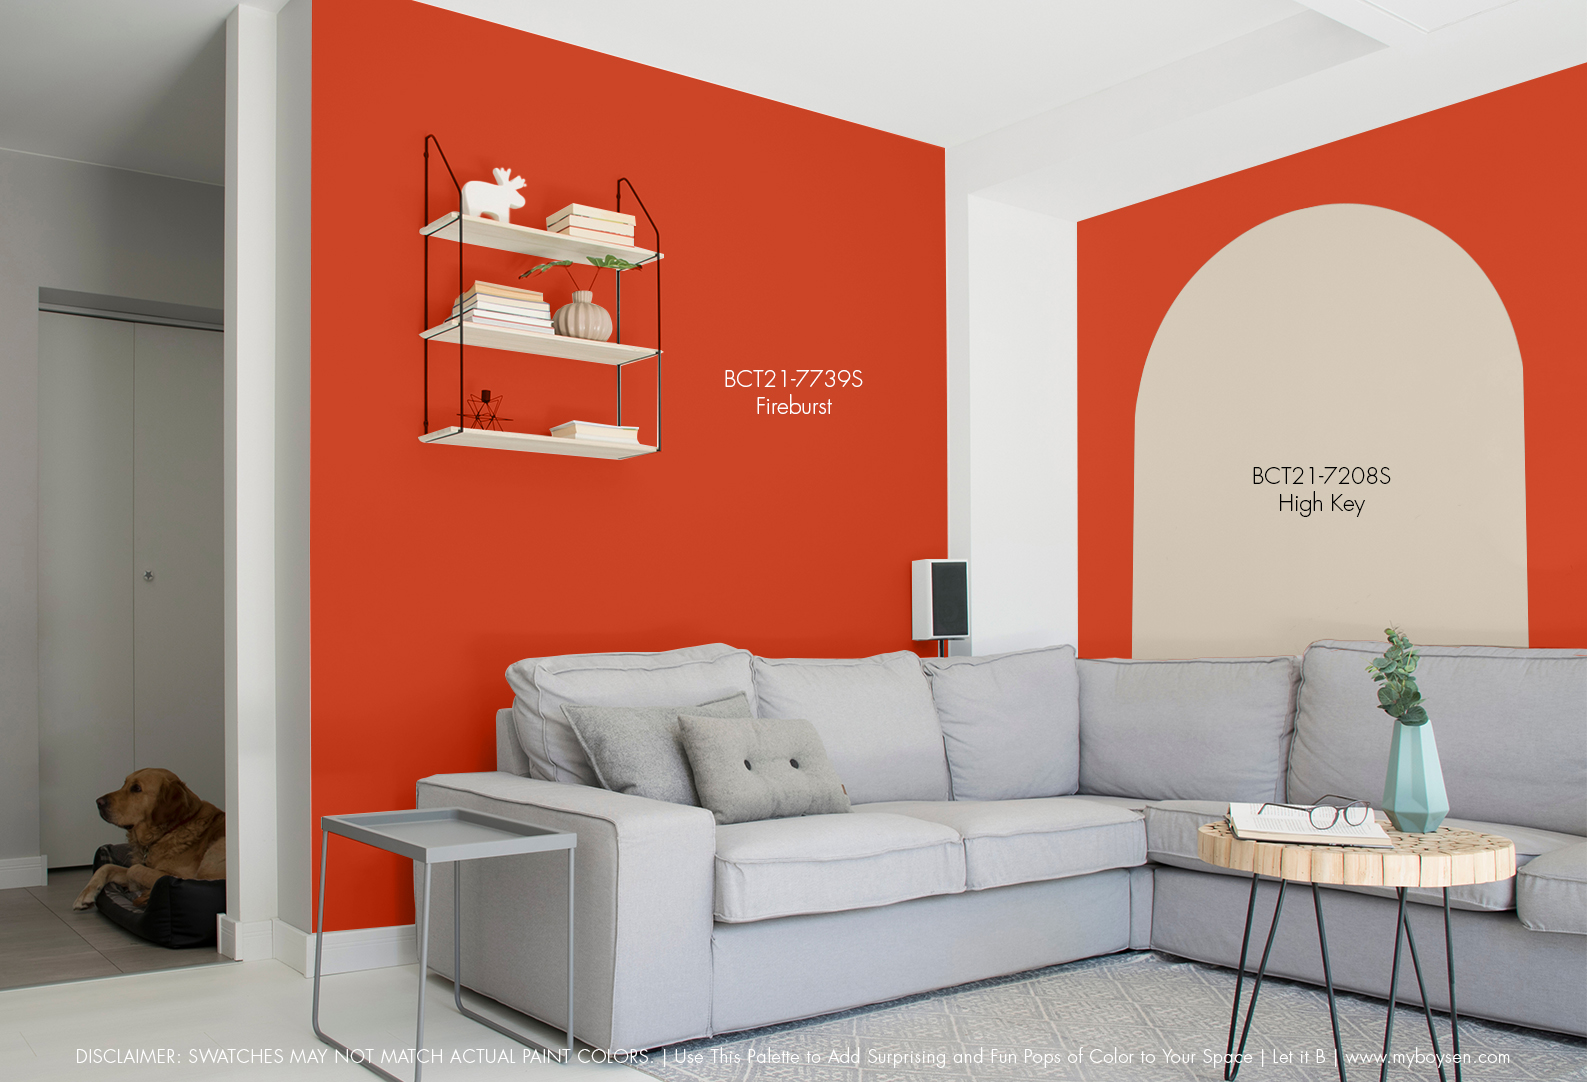 Use This Palette to Add Surprising and Fun Pops of Color to Your Space | MyBoysen